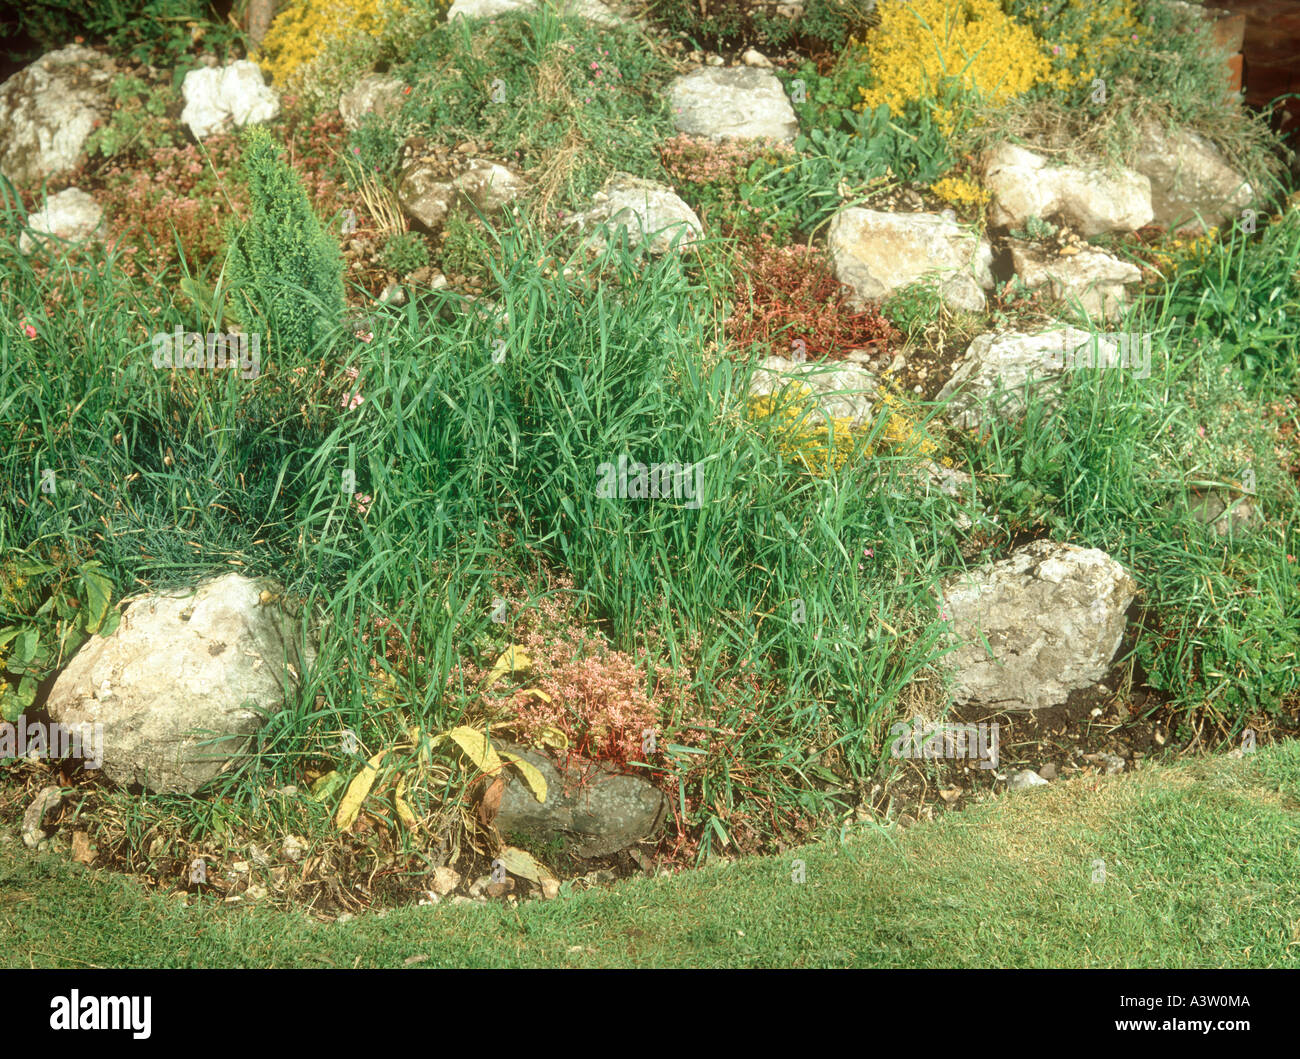 Couch grass Agropyron repens infesting rockery and flower beds in a garden Stock Photo